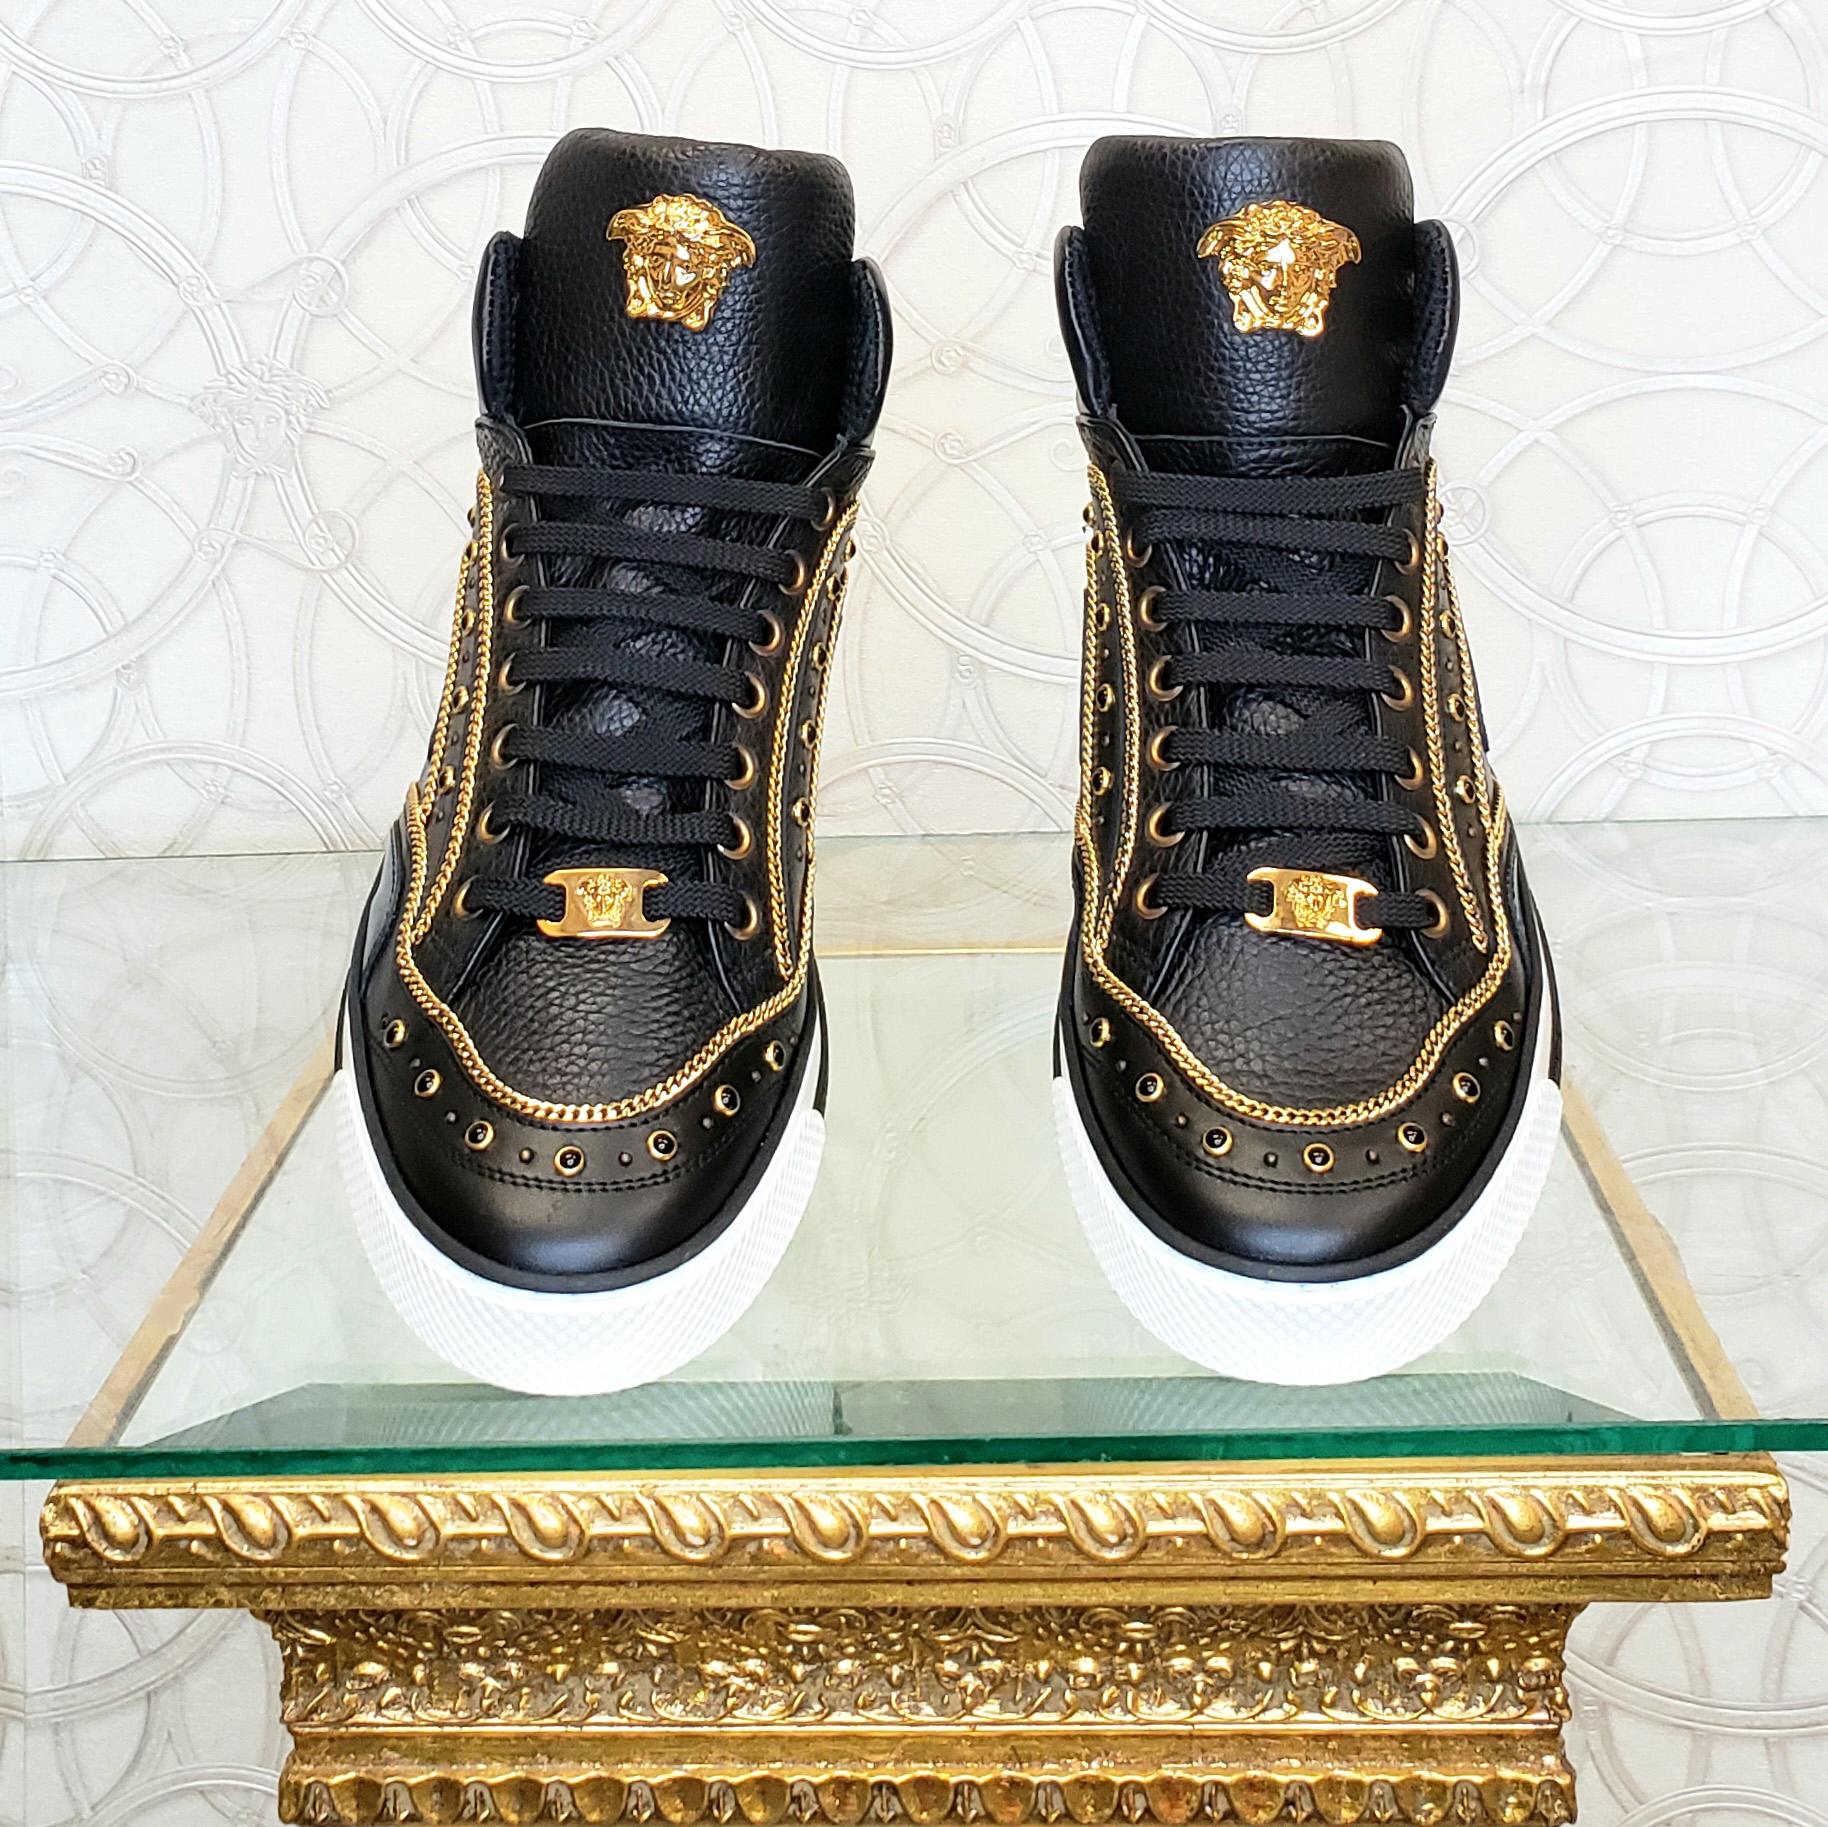 Men's NEW VERSACE STUDDED HIGH-TOP SNEAKERS with GOLD 3D MEDUSA BUCKLE SIZE 43 - 10